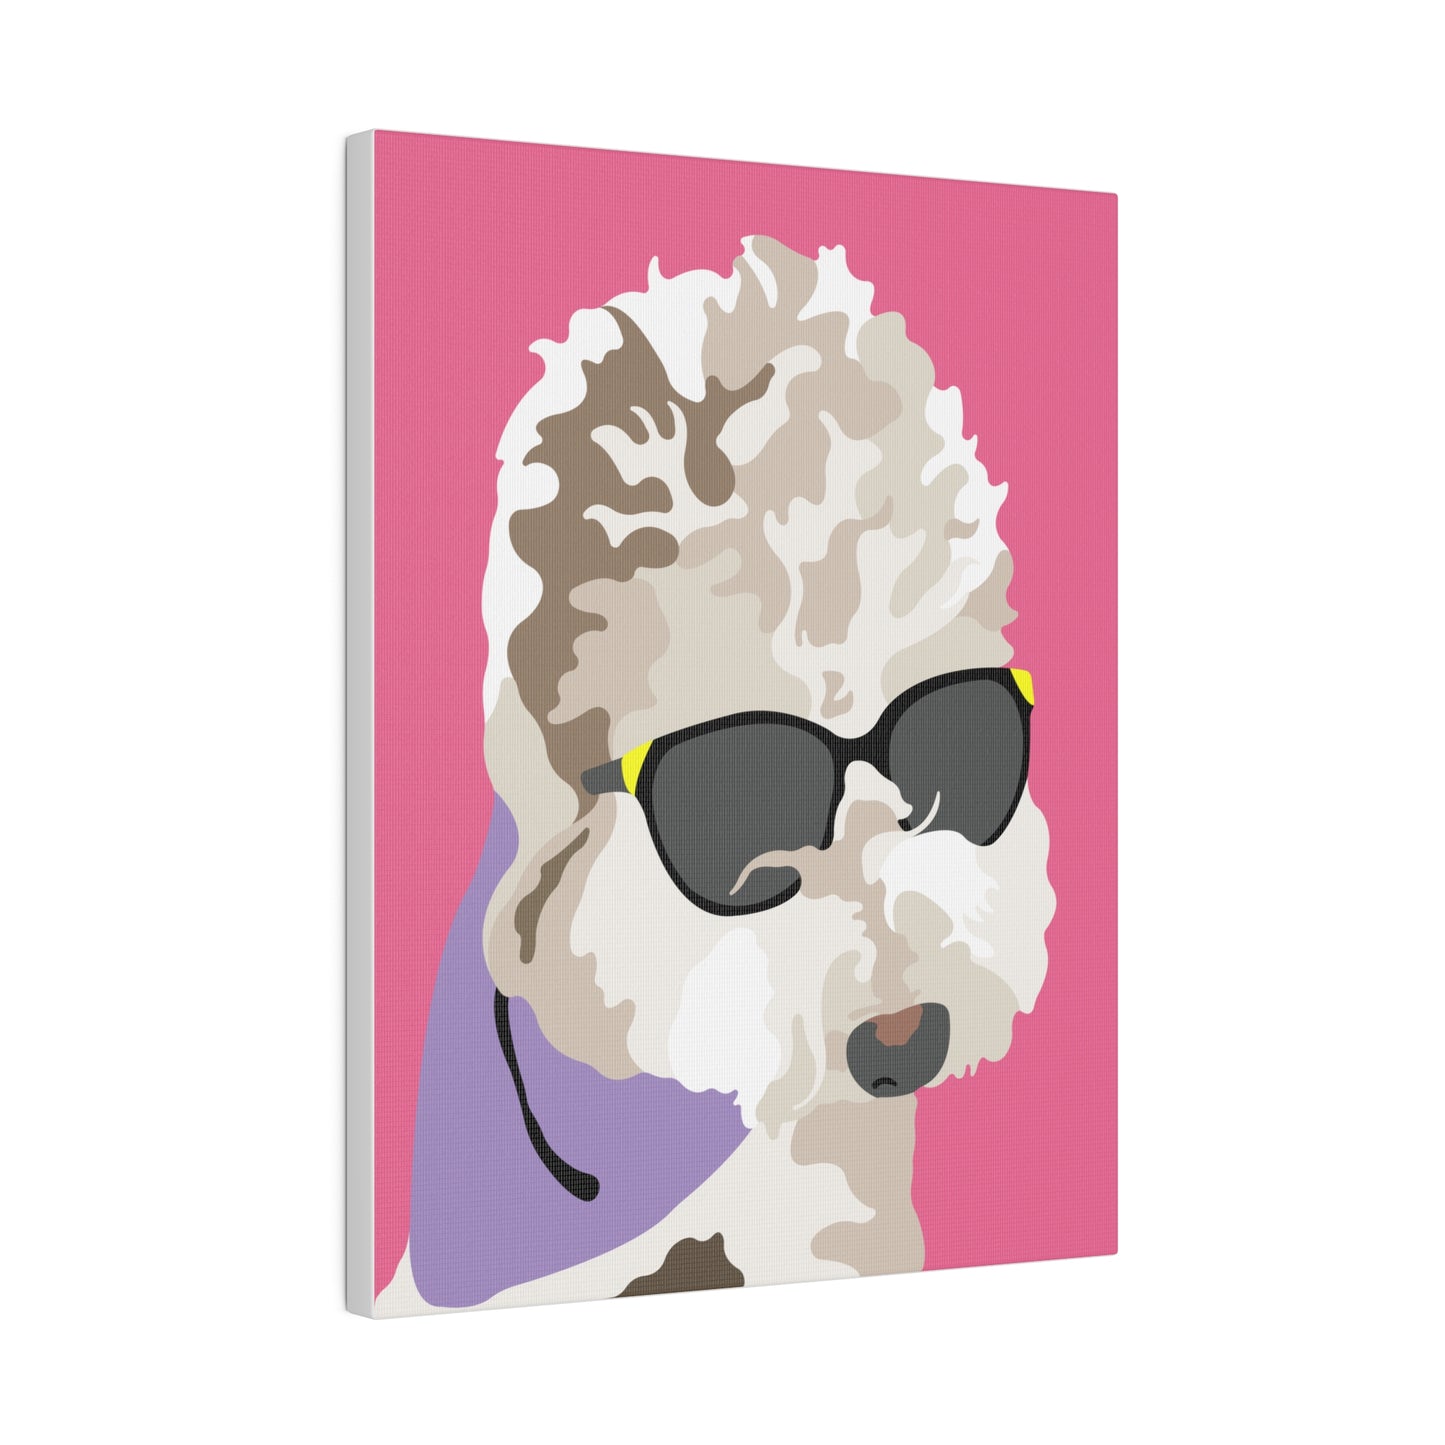 One Pet Portrait on Canvas | Hot Pink Background | Custom Hand-Drawn Pet Portrait in Cartoon-Realism Style